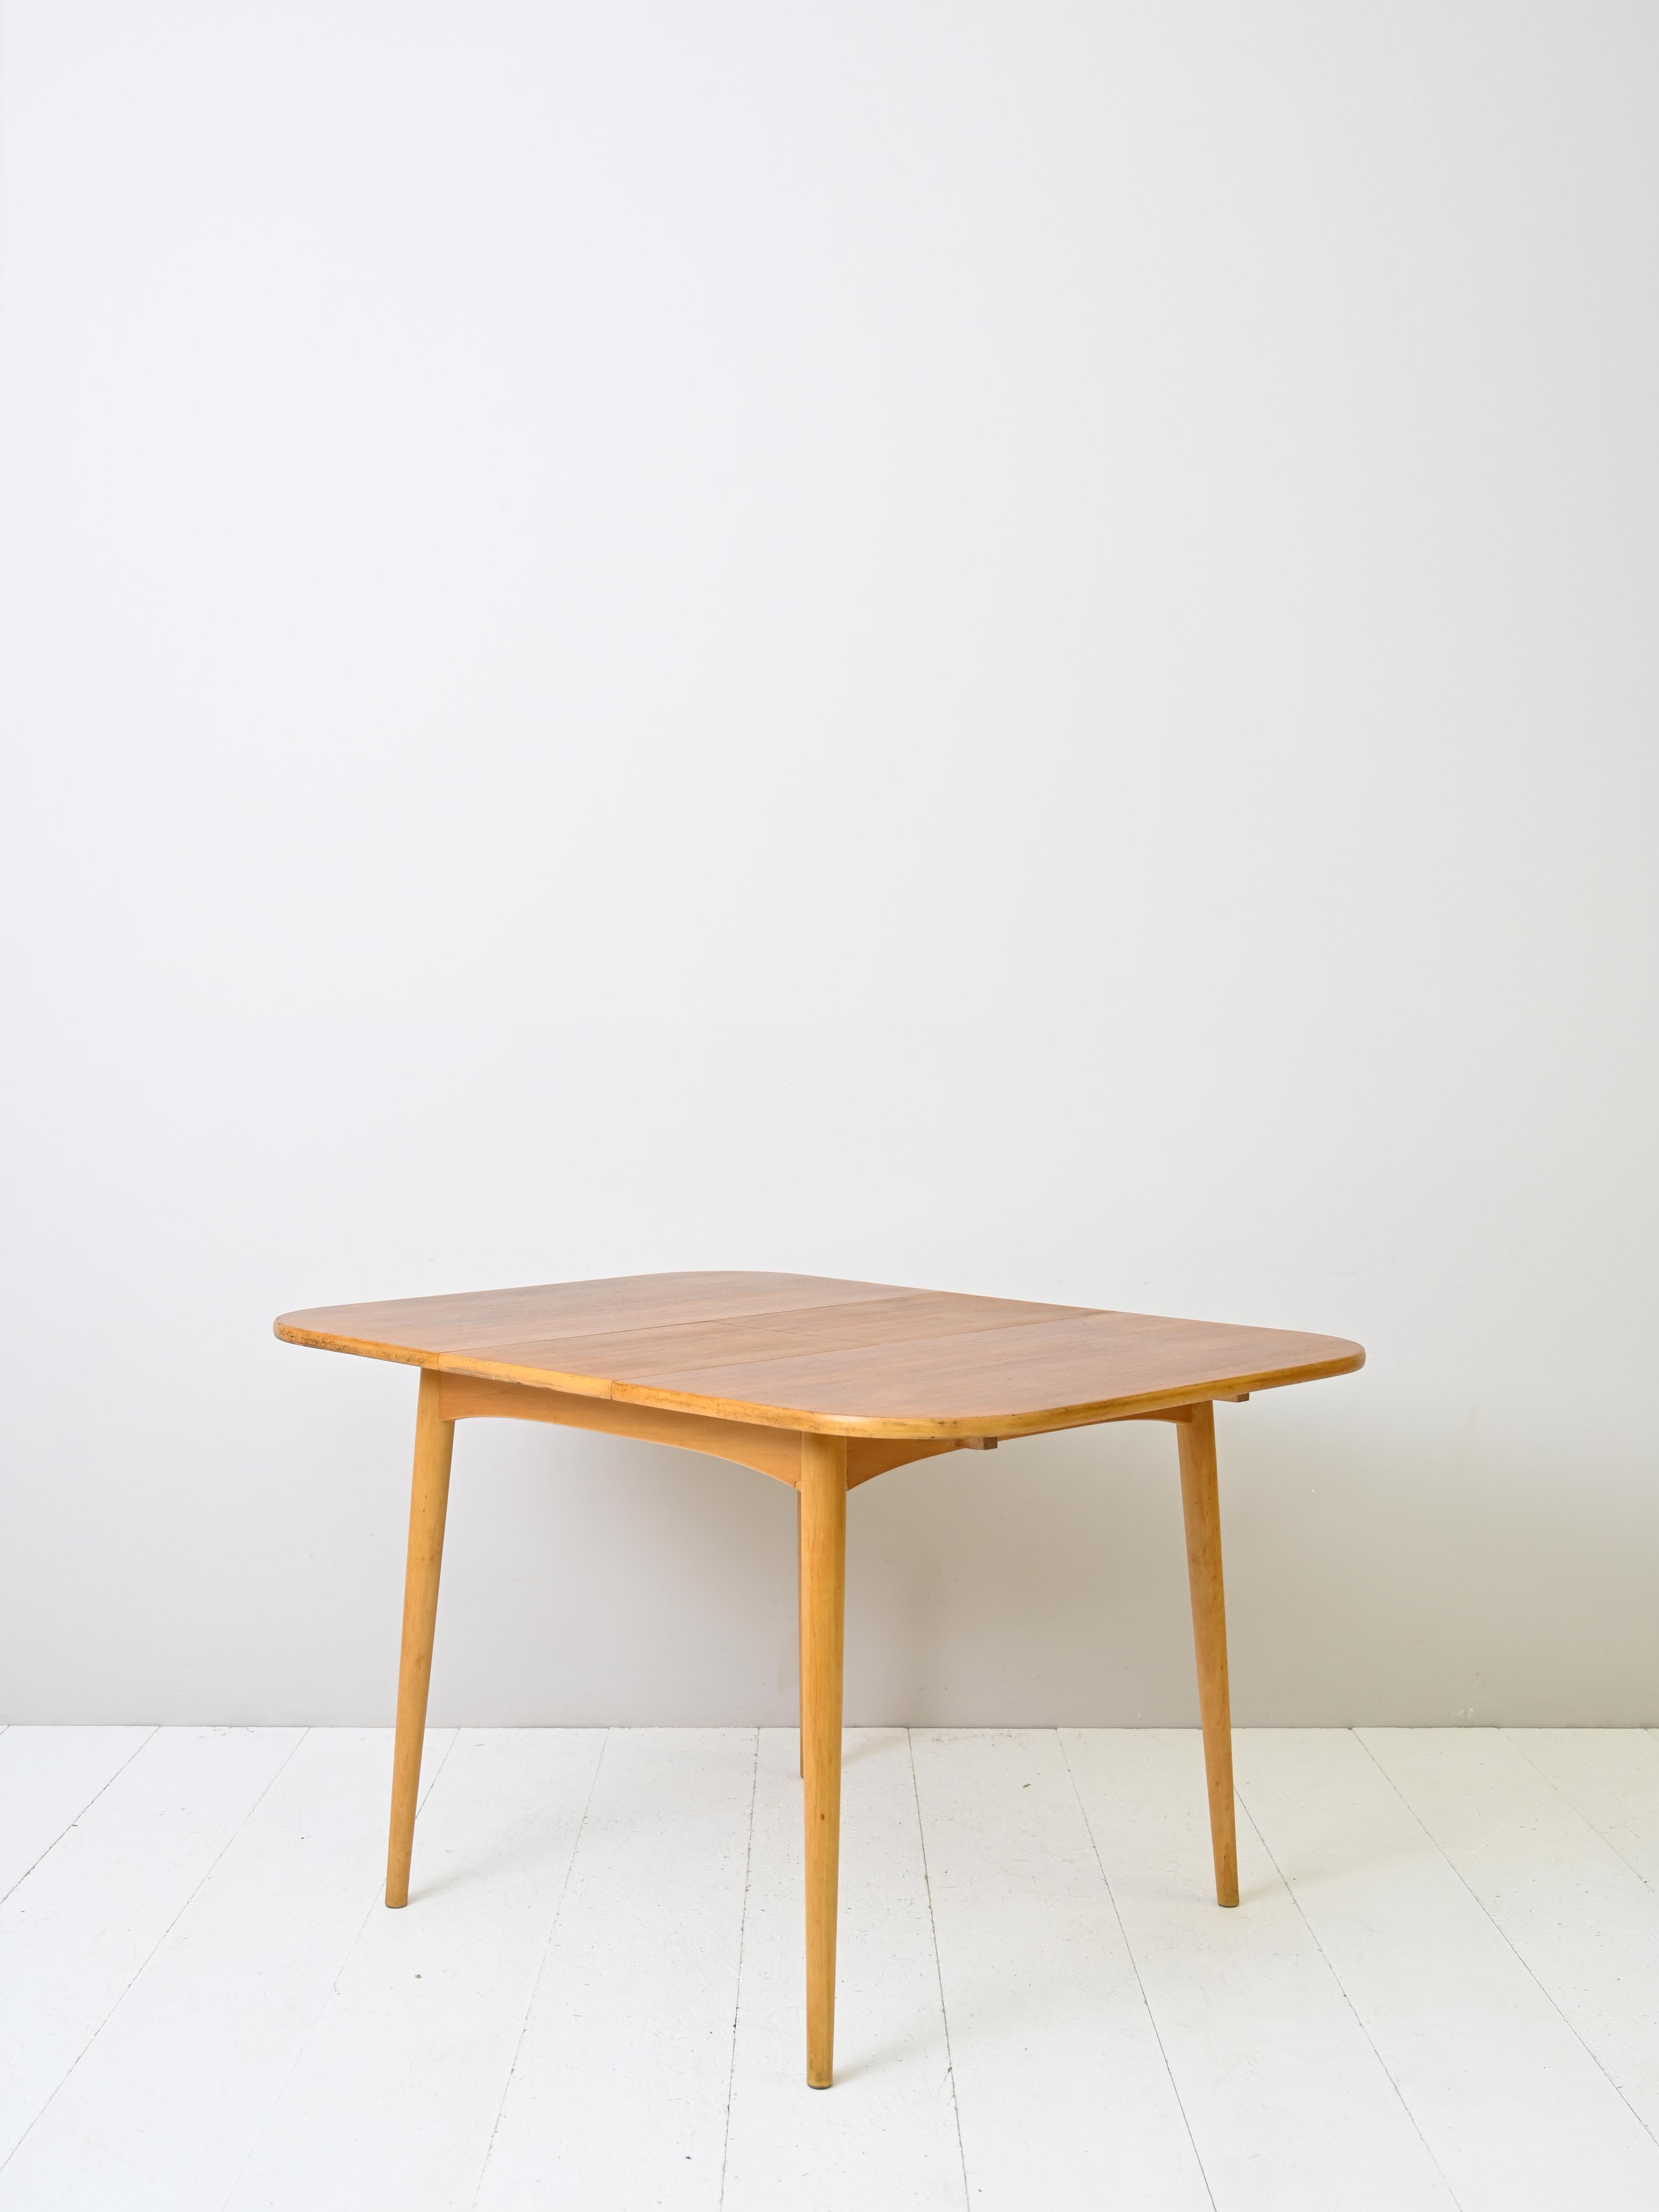 Square extendable teak table made in Scandinavia in the 1960s.

Beautiful and functional square table that can be extended with a center board.

The table with rounded corners features a teak wood top.

TABLE DIMENSIONS CLOSED 90CM 
TABLE